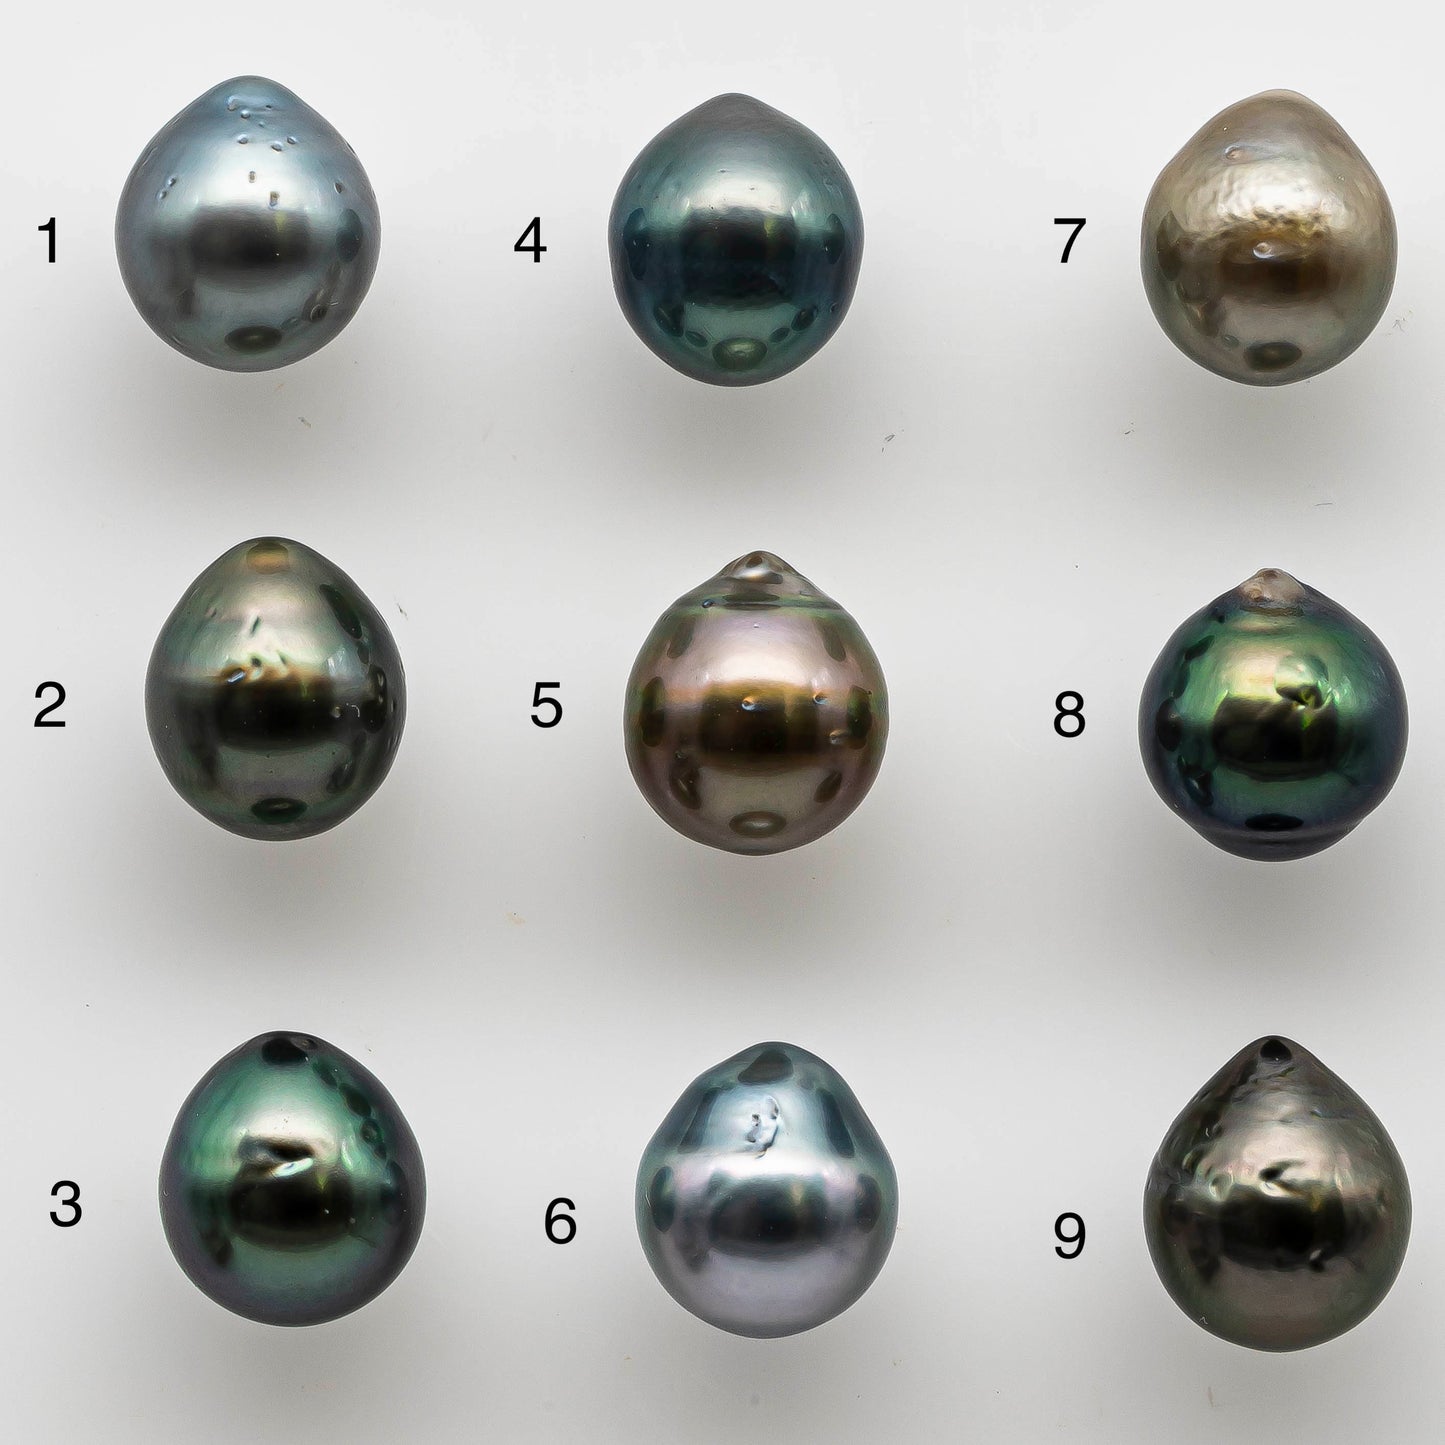 8-9mm Tahitian Pearl Tear Drops Undrilled Loose High Luster in Natural Color with Blemish, One Single Piece, SKU # 1459TH